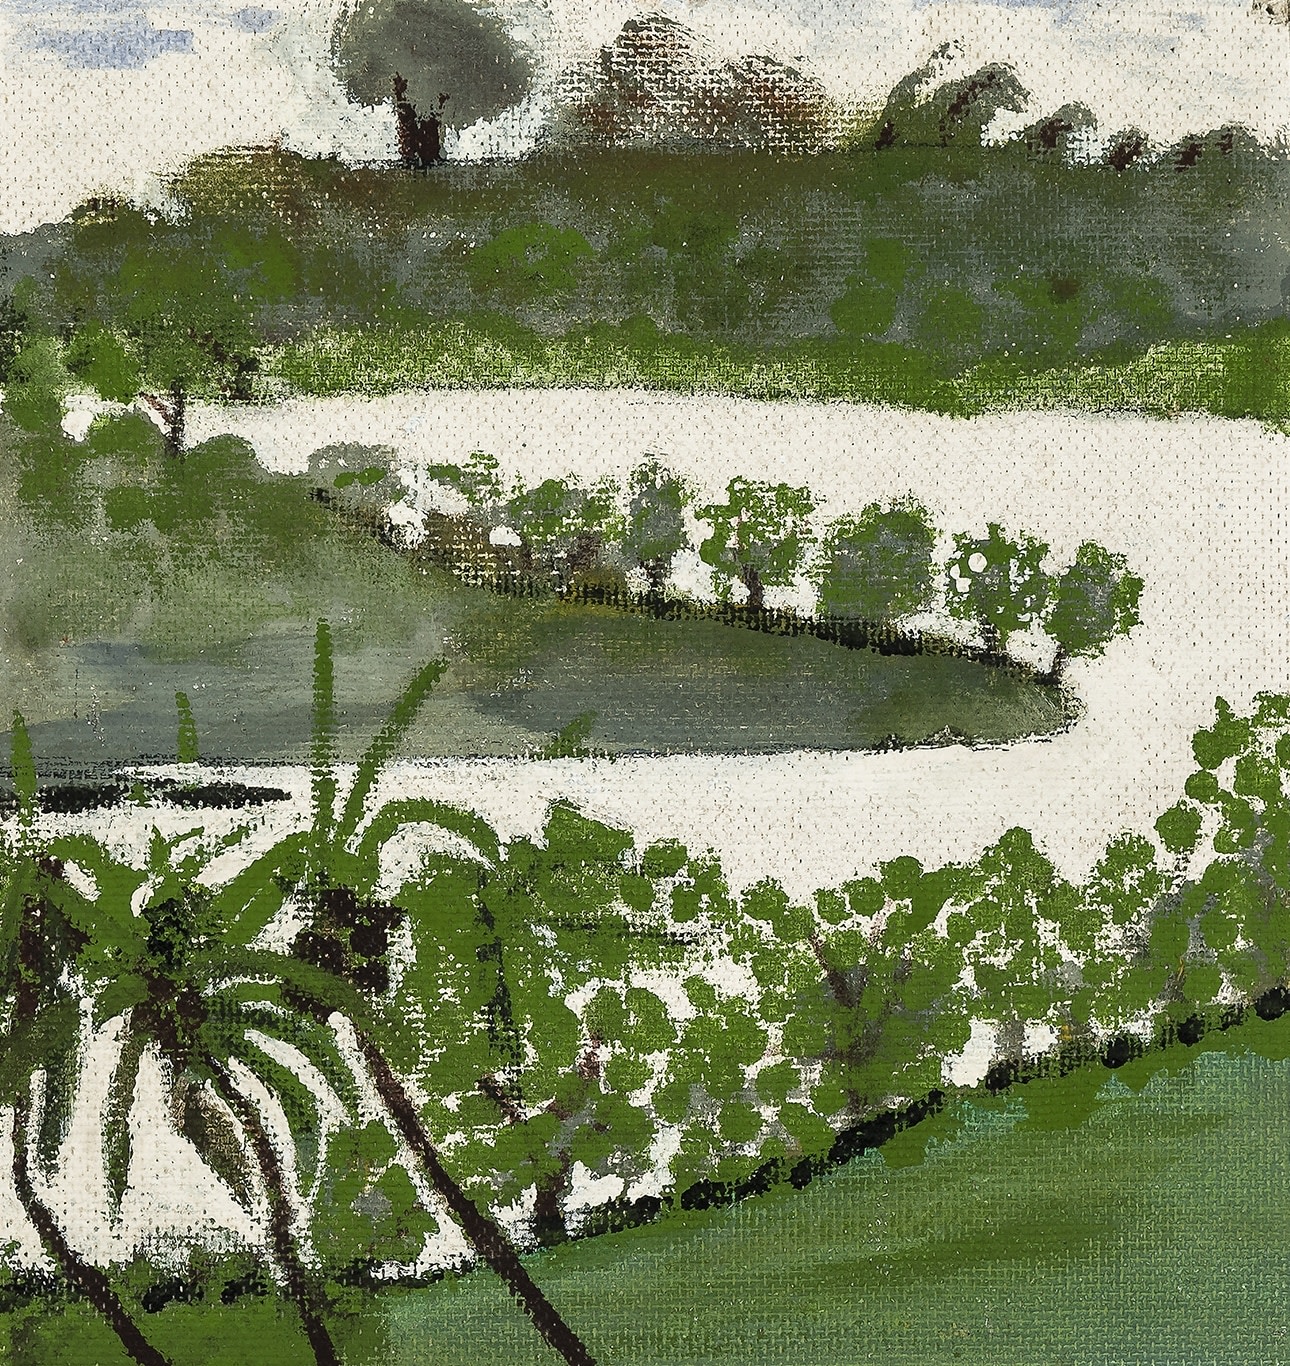 Island Landscape with Inlets